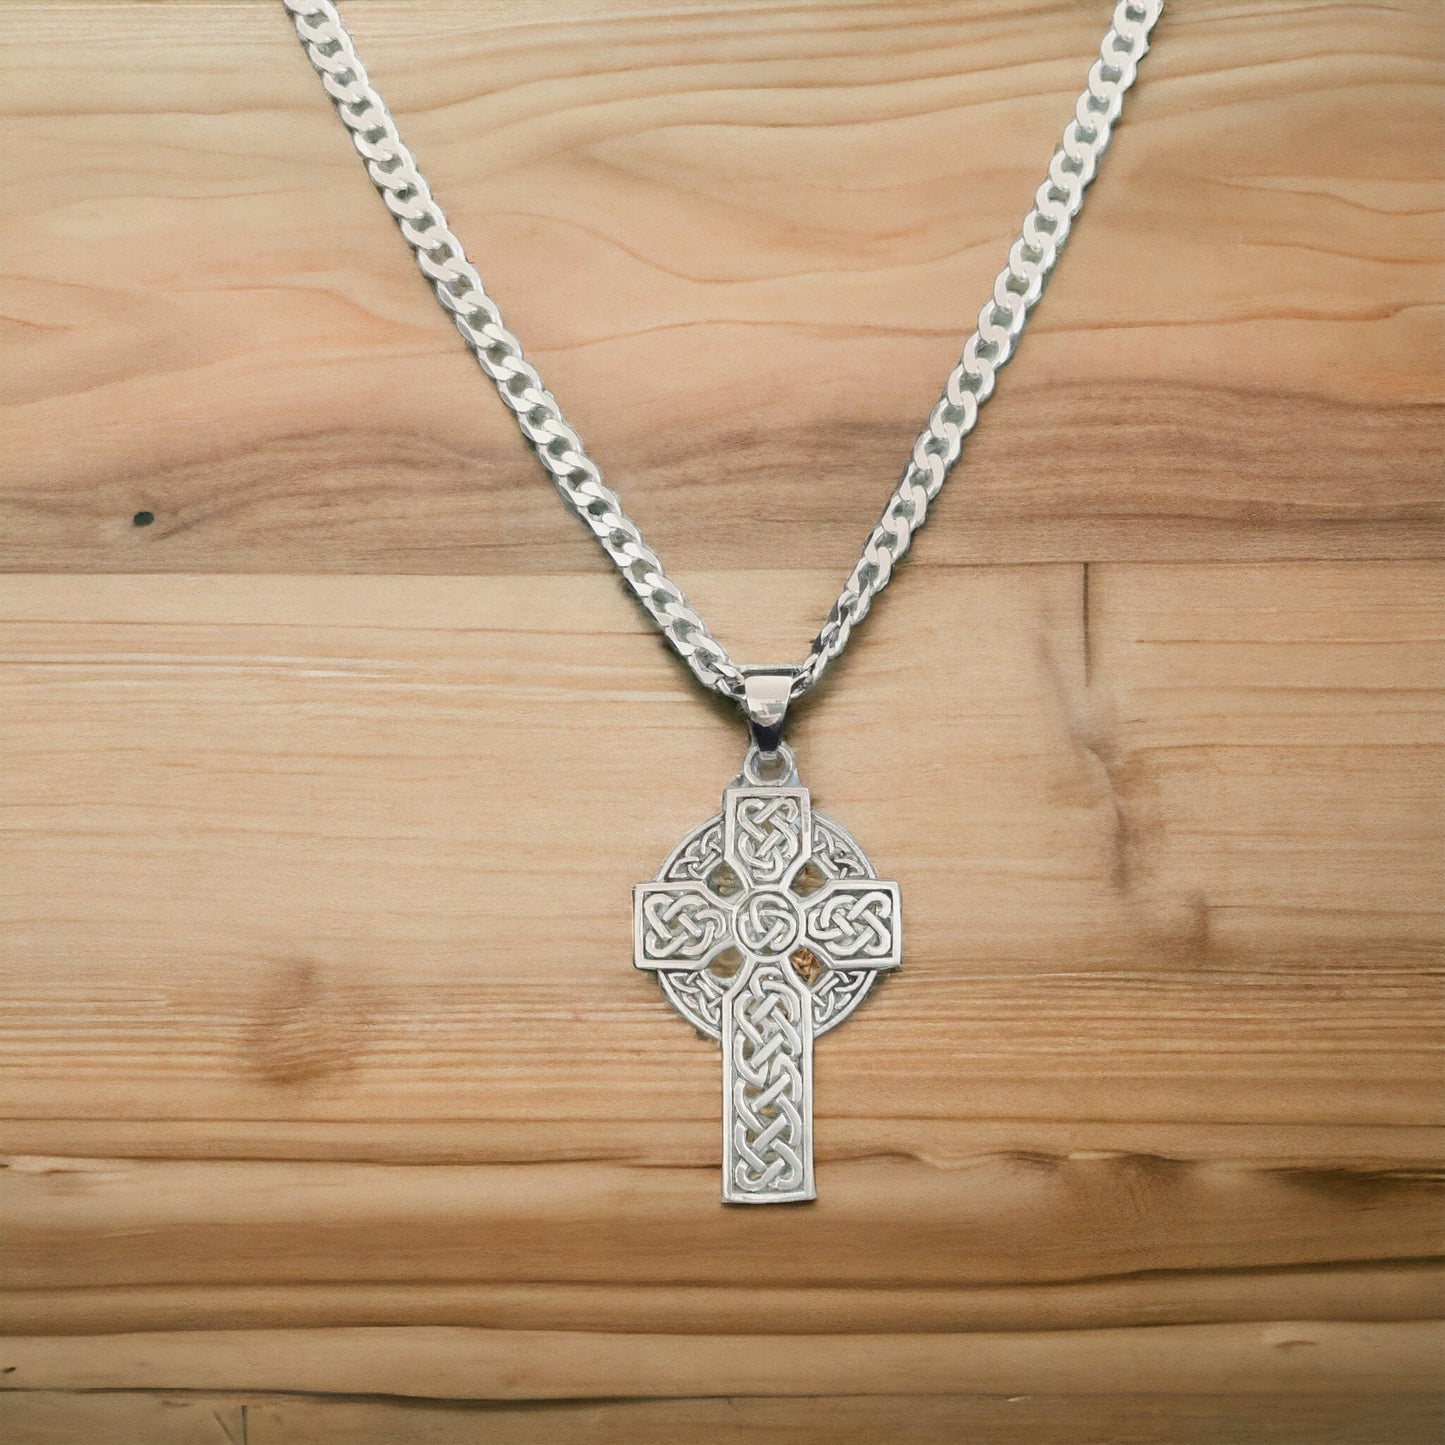 Large Handcast 925 Sterling Silver Irish Celtic Cross Pendant + Free Chain Necklace